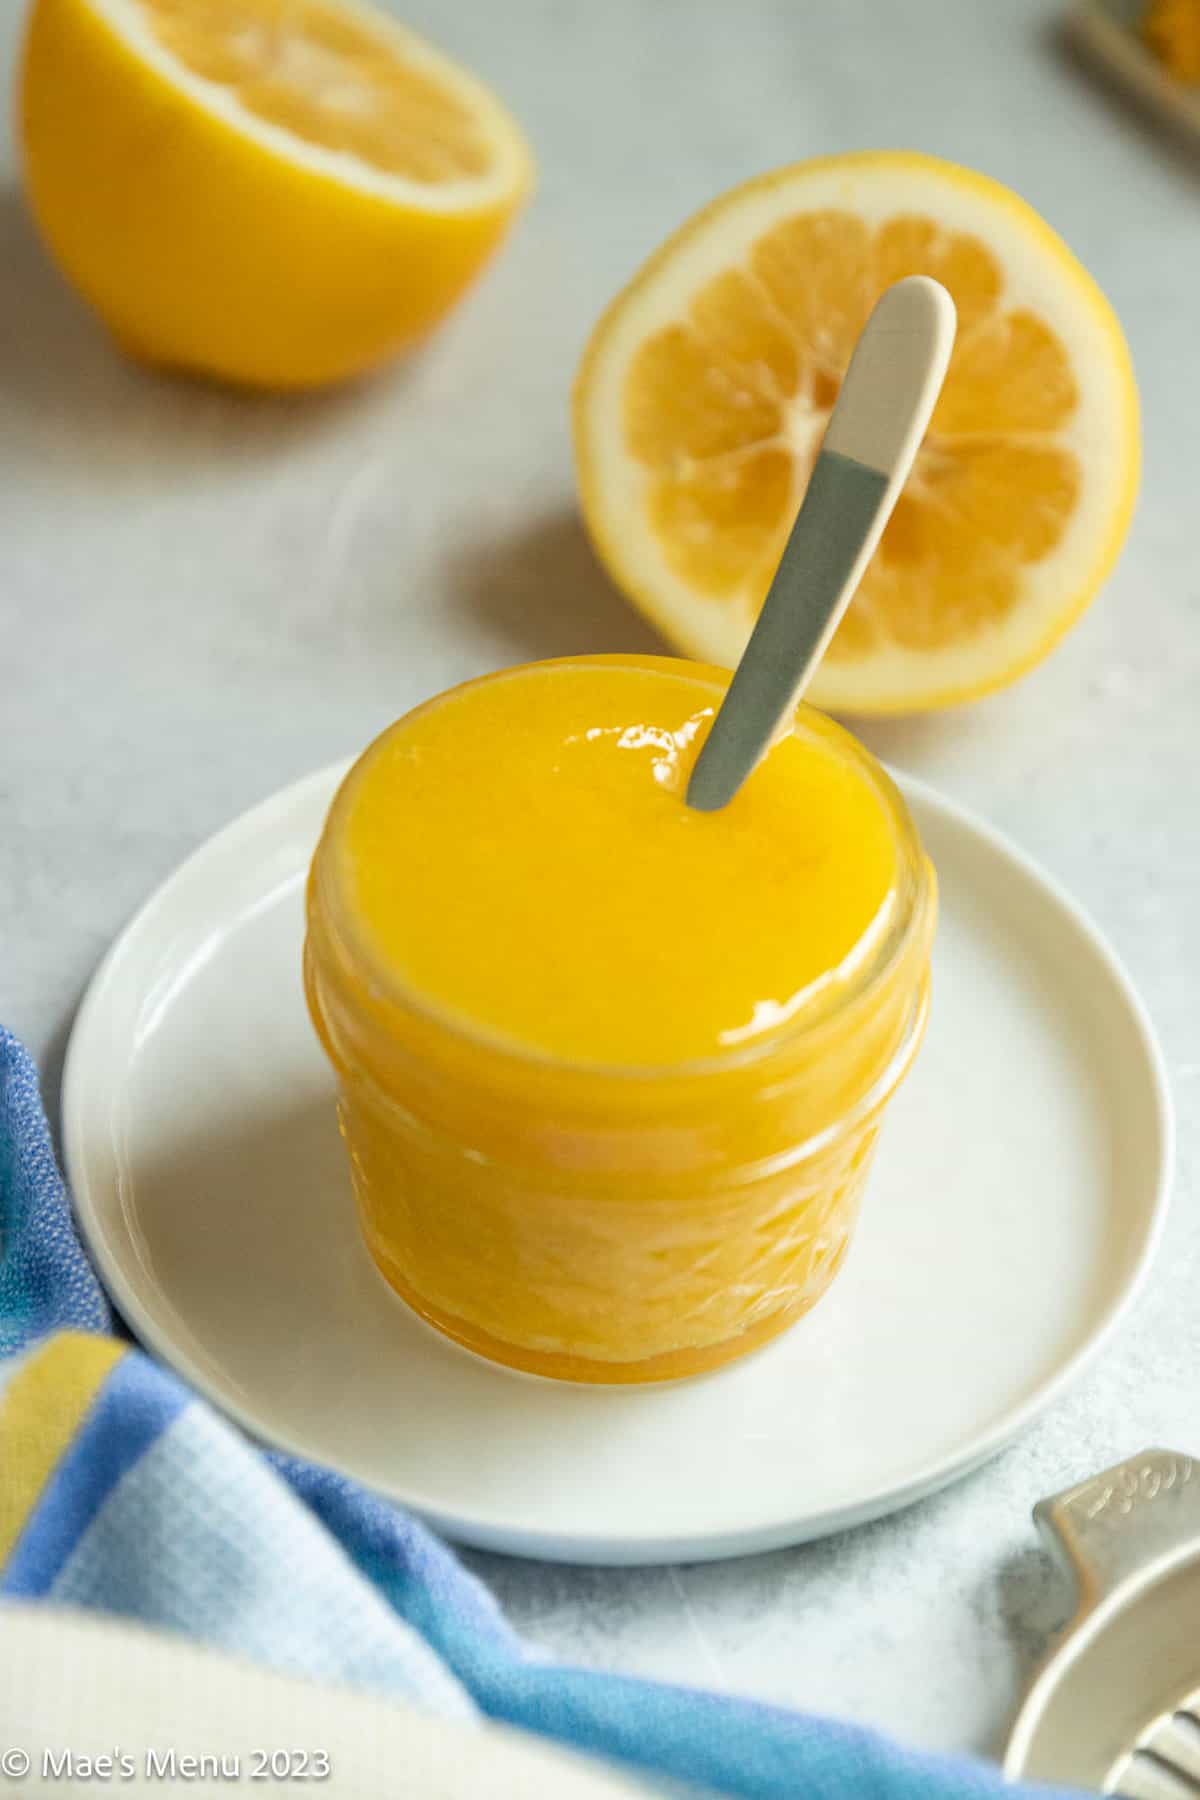 A small dish of meyer lemon curd with a spoon.